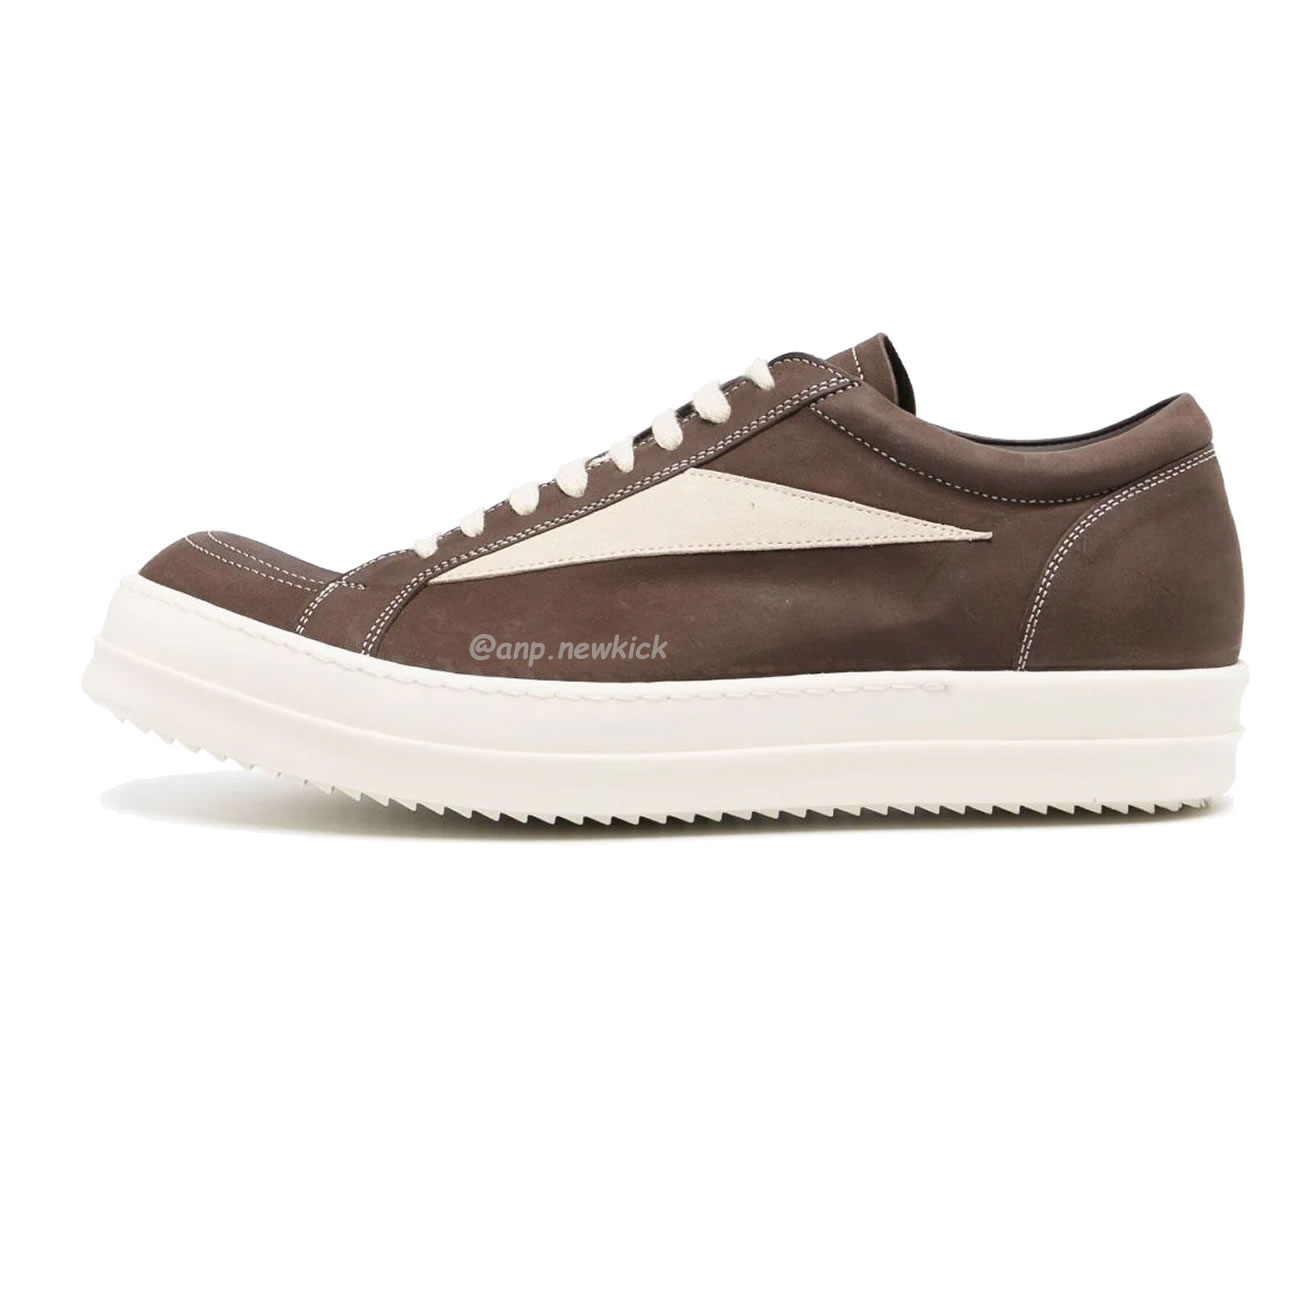 Rick Owens Leather Low Top Vintage Sneakers Suede Canvas Black Taupe Grey Faded Pnk Pearl Milk Dark Dust (34) - newkick.org